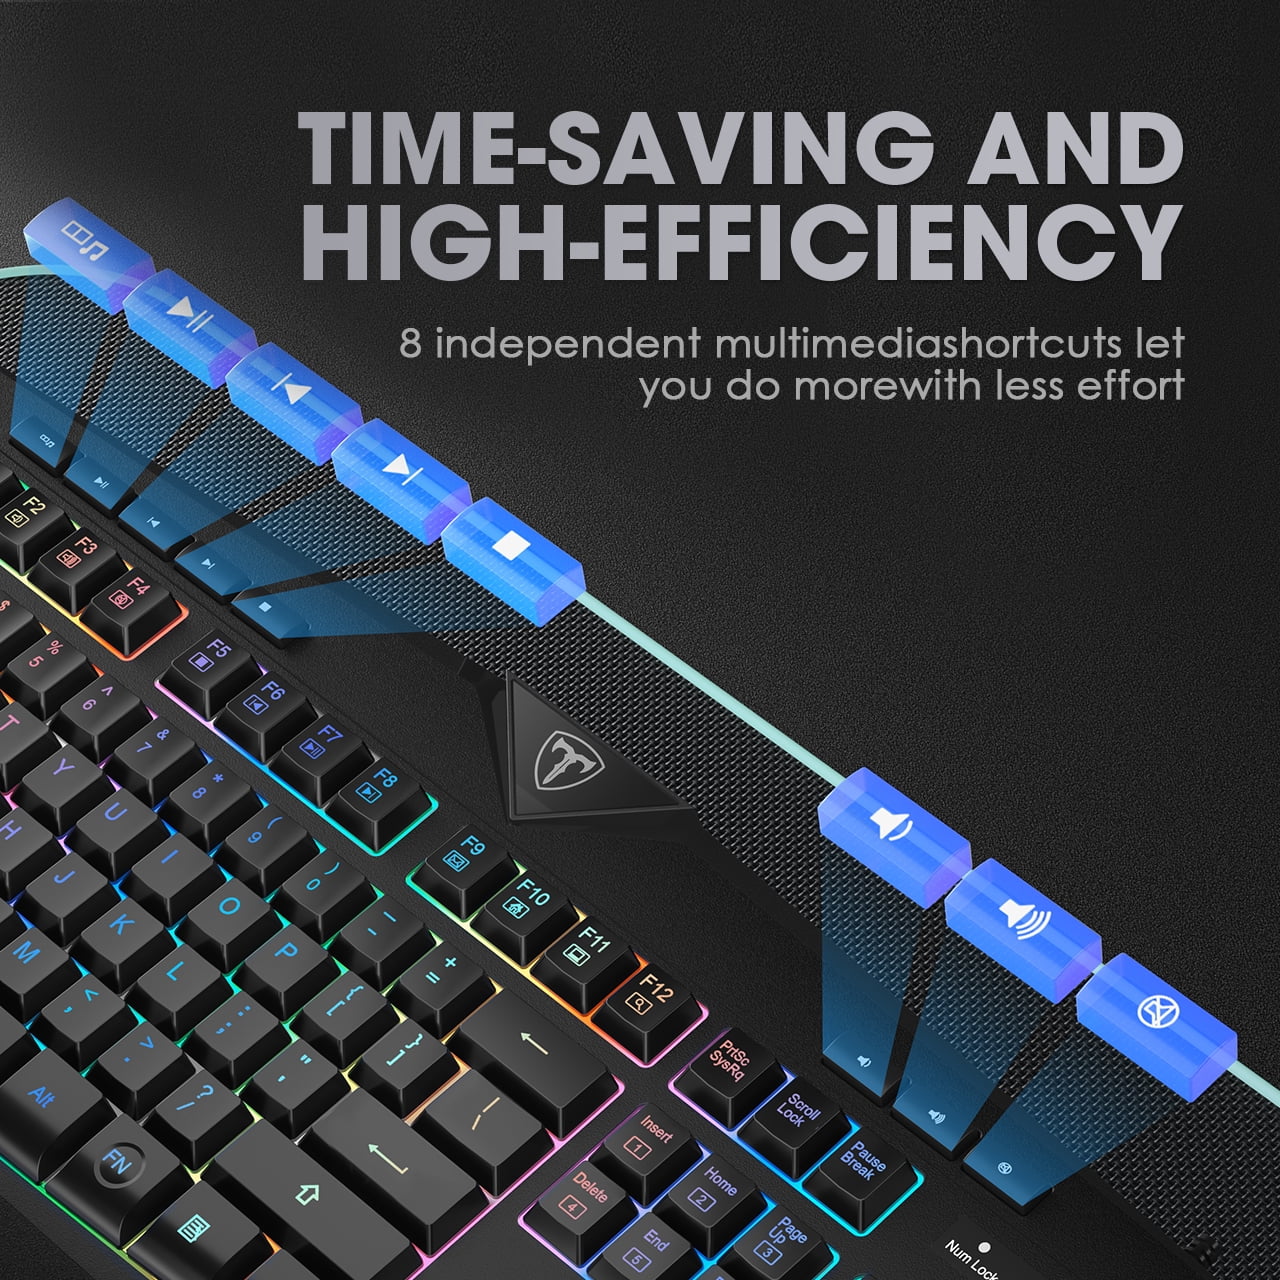 Mechanical Gaming Keyboard Hot Swappable with Multi Monochromatic Backlight 104Key Anti-ghosting Ergonomic Metal Plate Multimedia Key USB Wired for PC